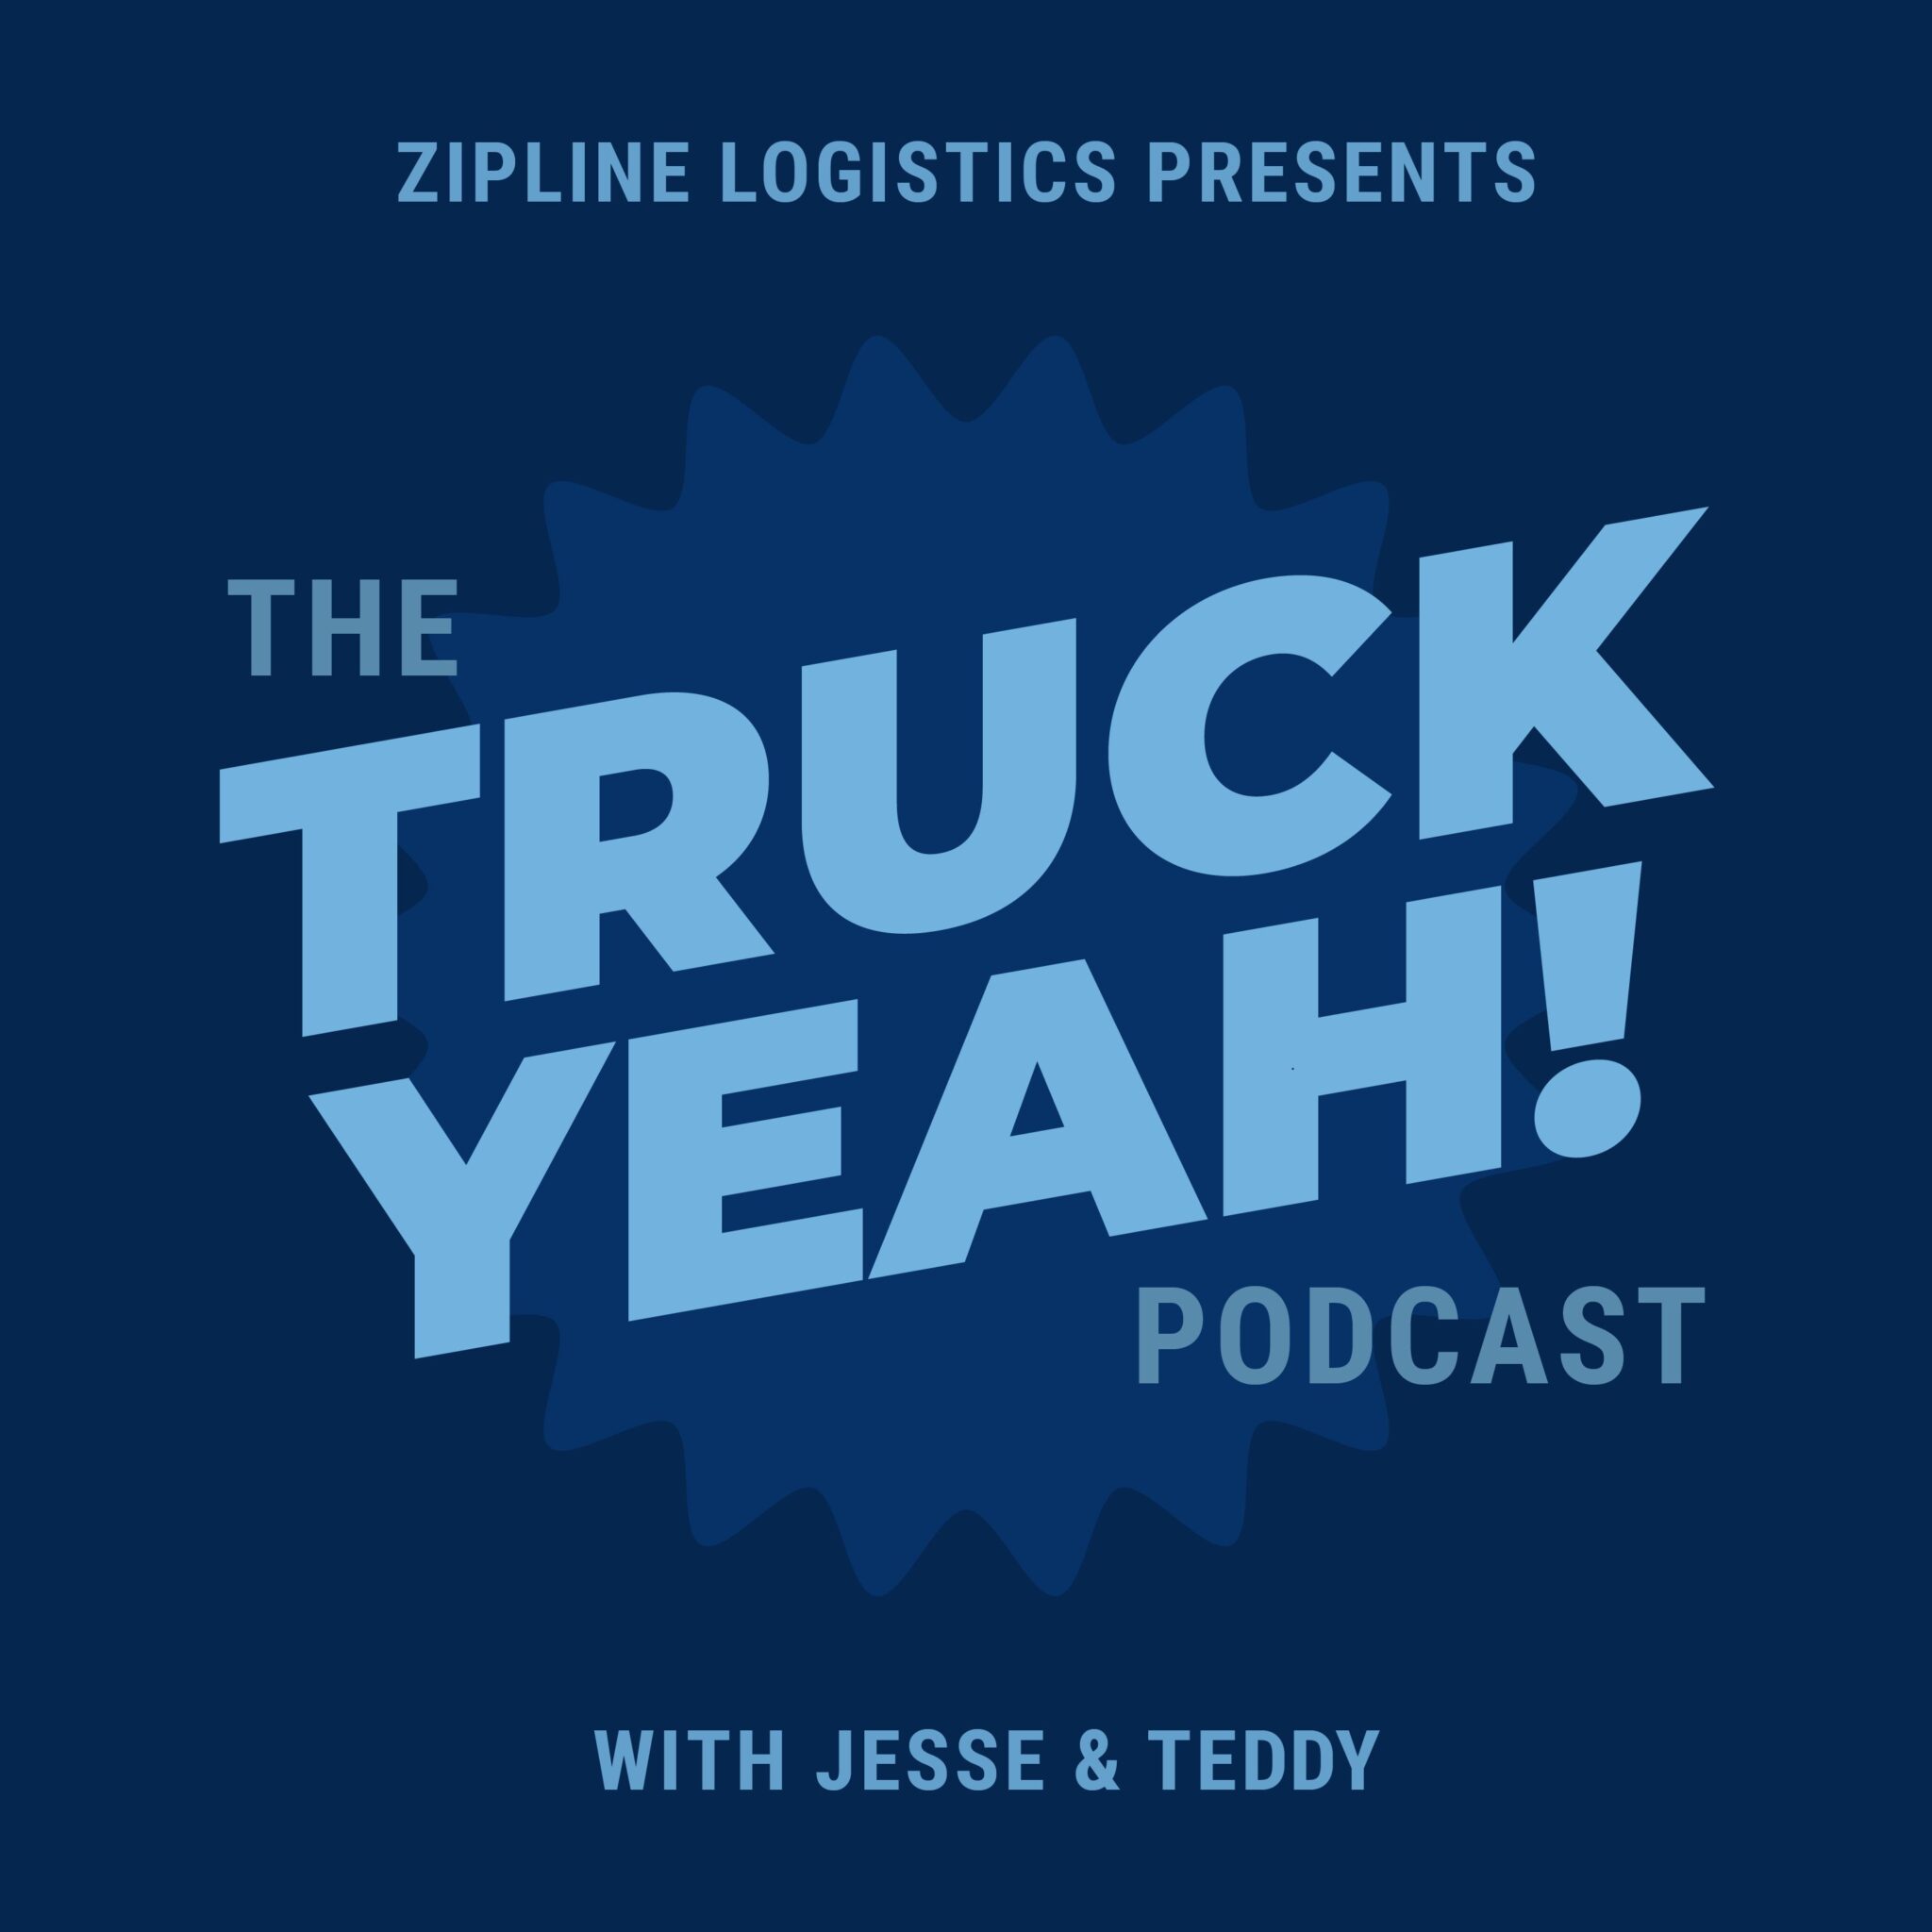 BONUS EPISODE: Why the TRUCK YEAH! button and podcast?